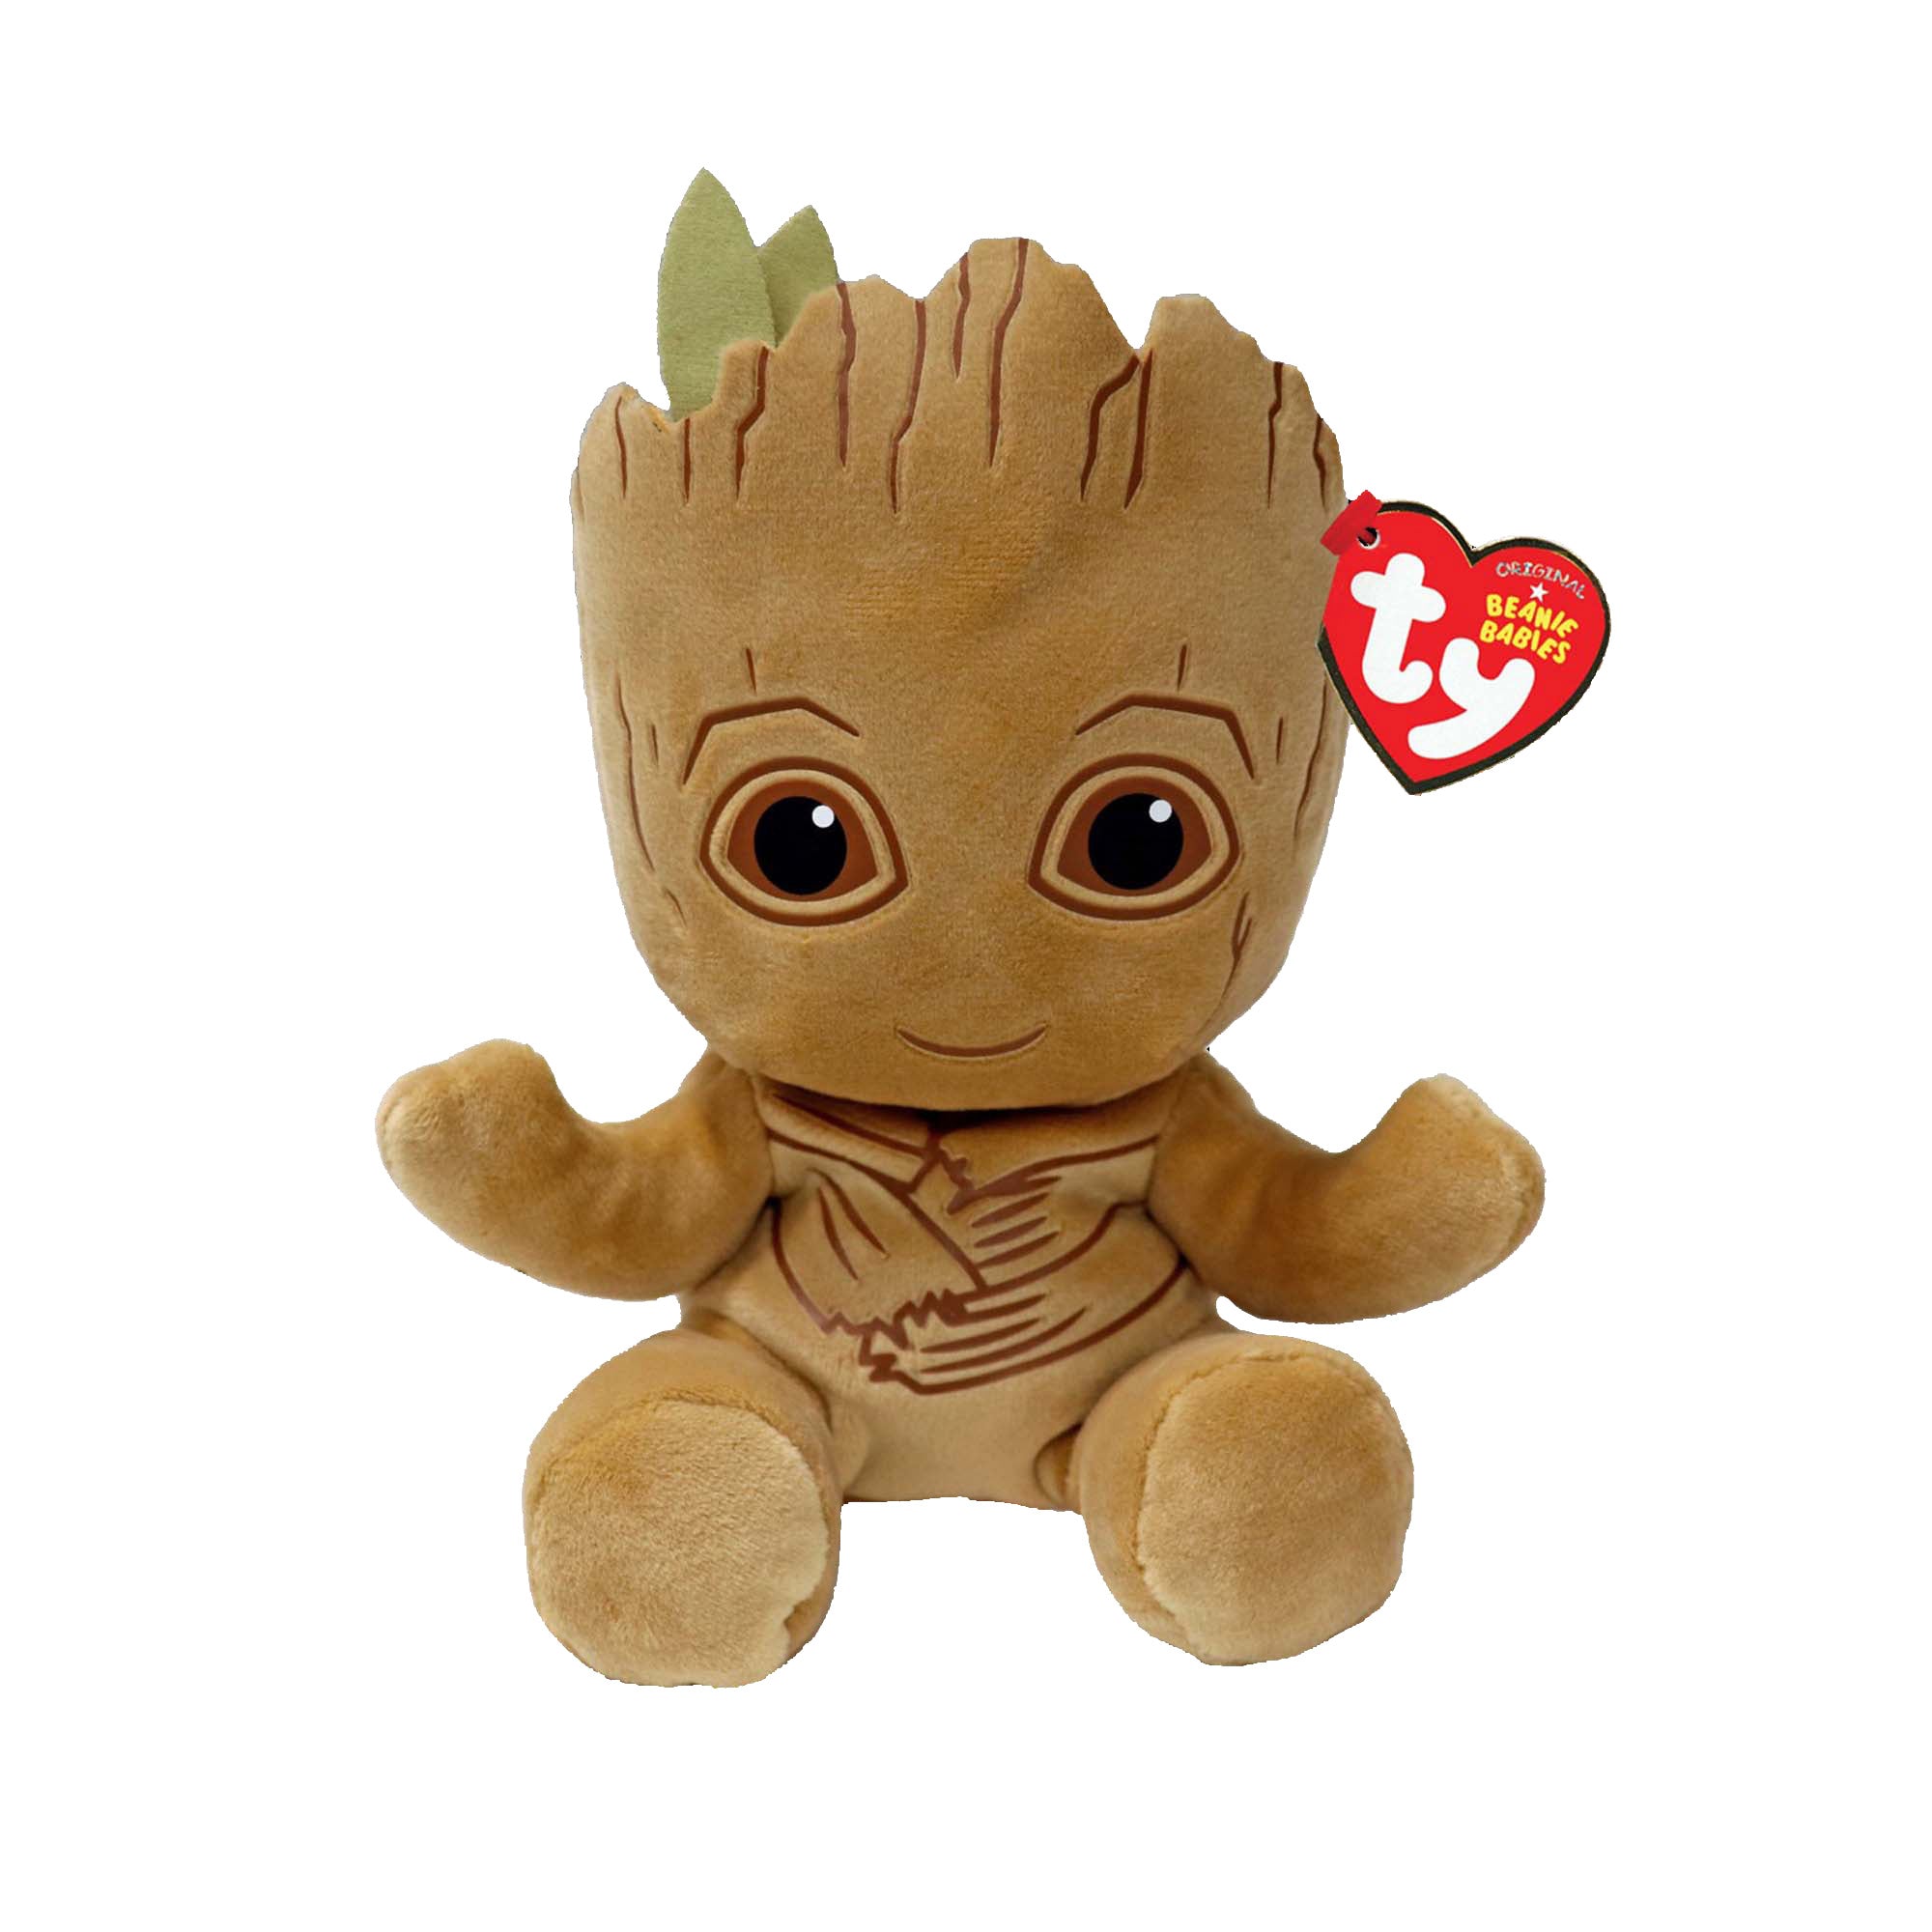 TY Marvel Soft Plush, Groot, 8 Inches, 1 Count